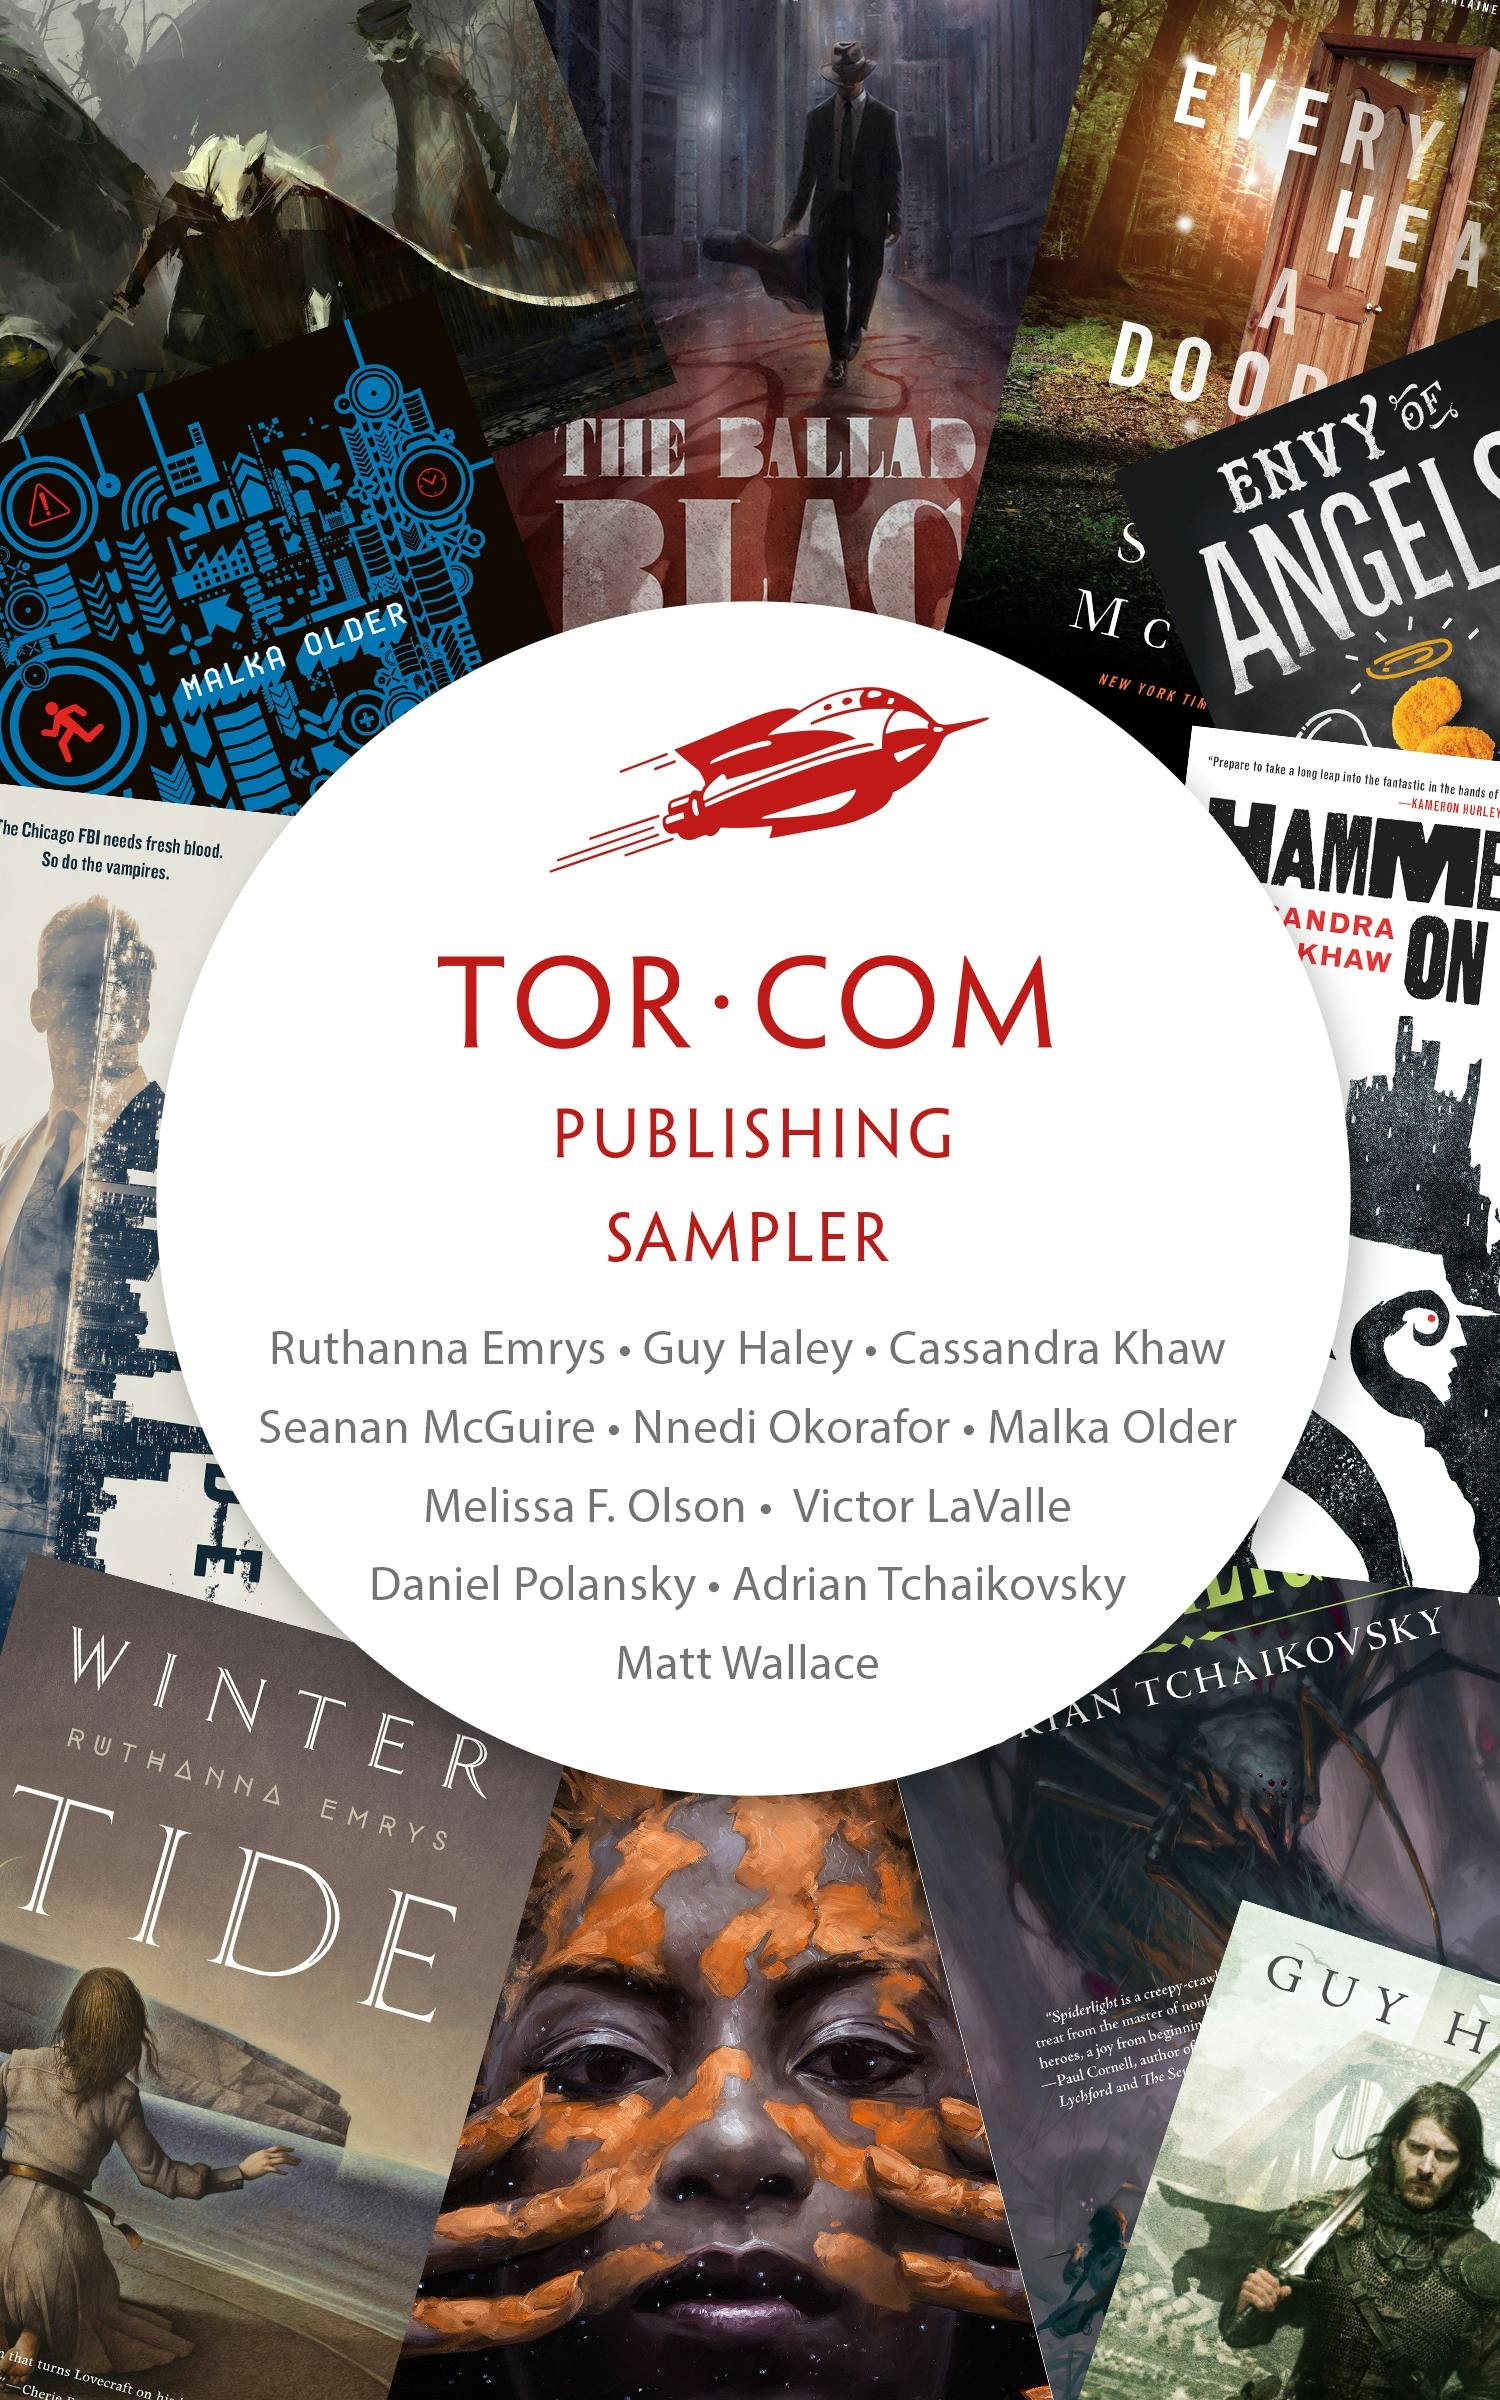 Cover for the book titled as: The Tor.com Sampler